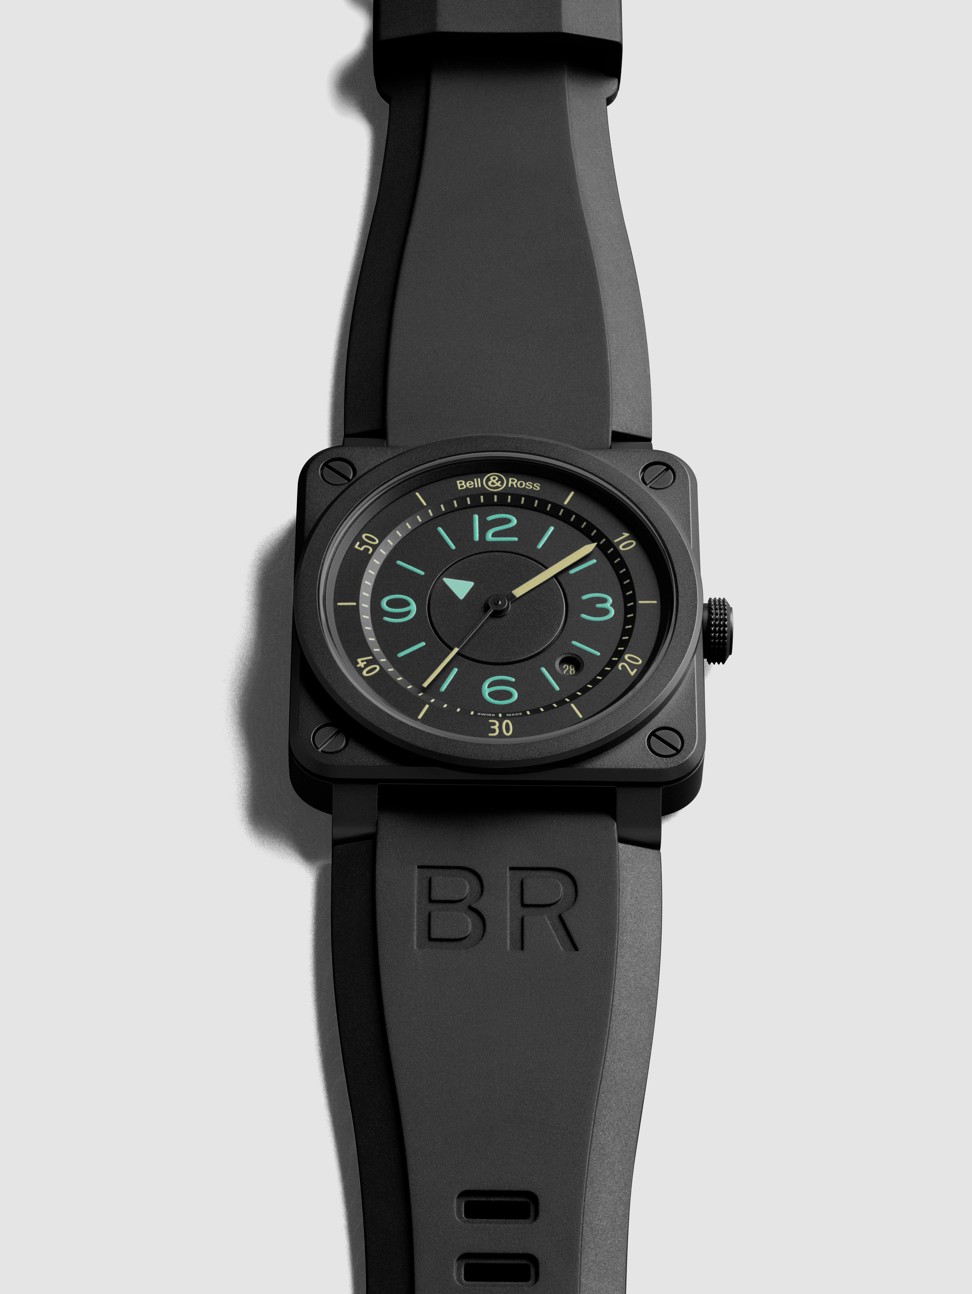 The BR03-92 Bi-Compass from Bell & Ross.